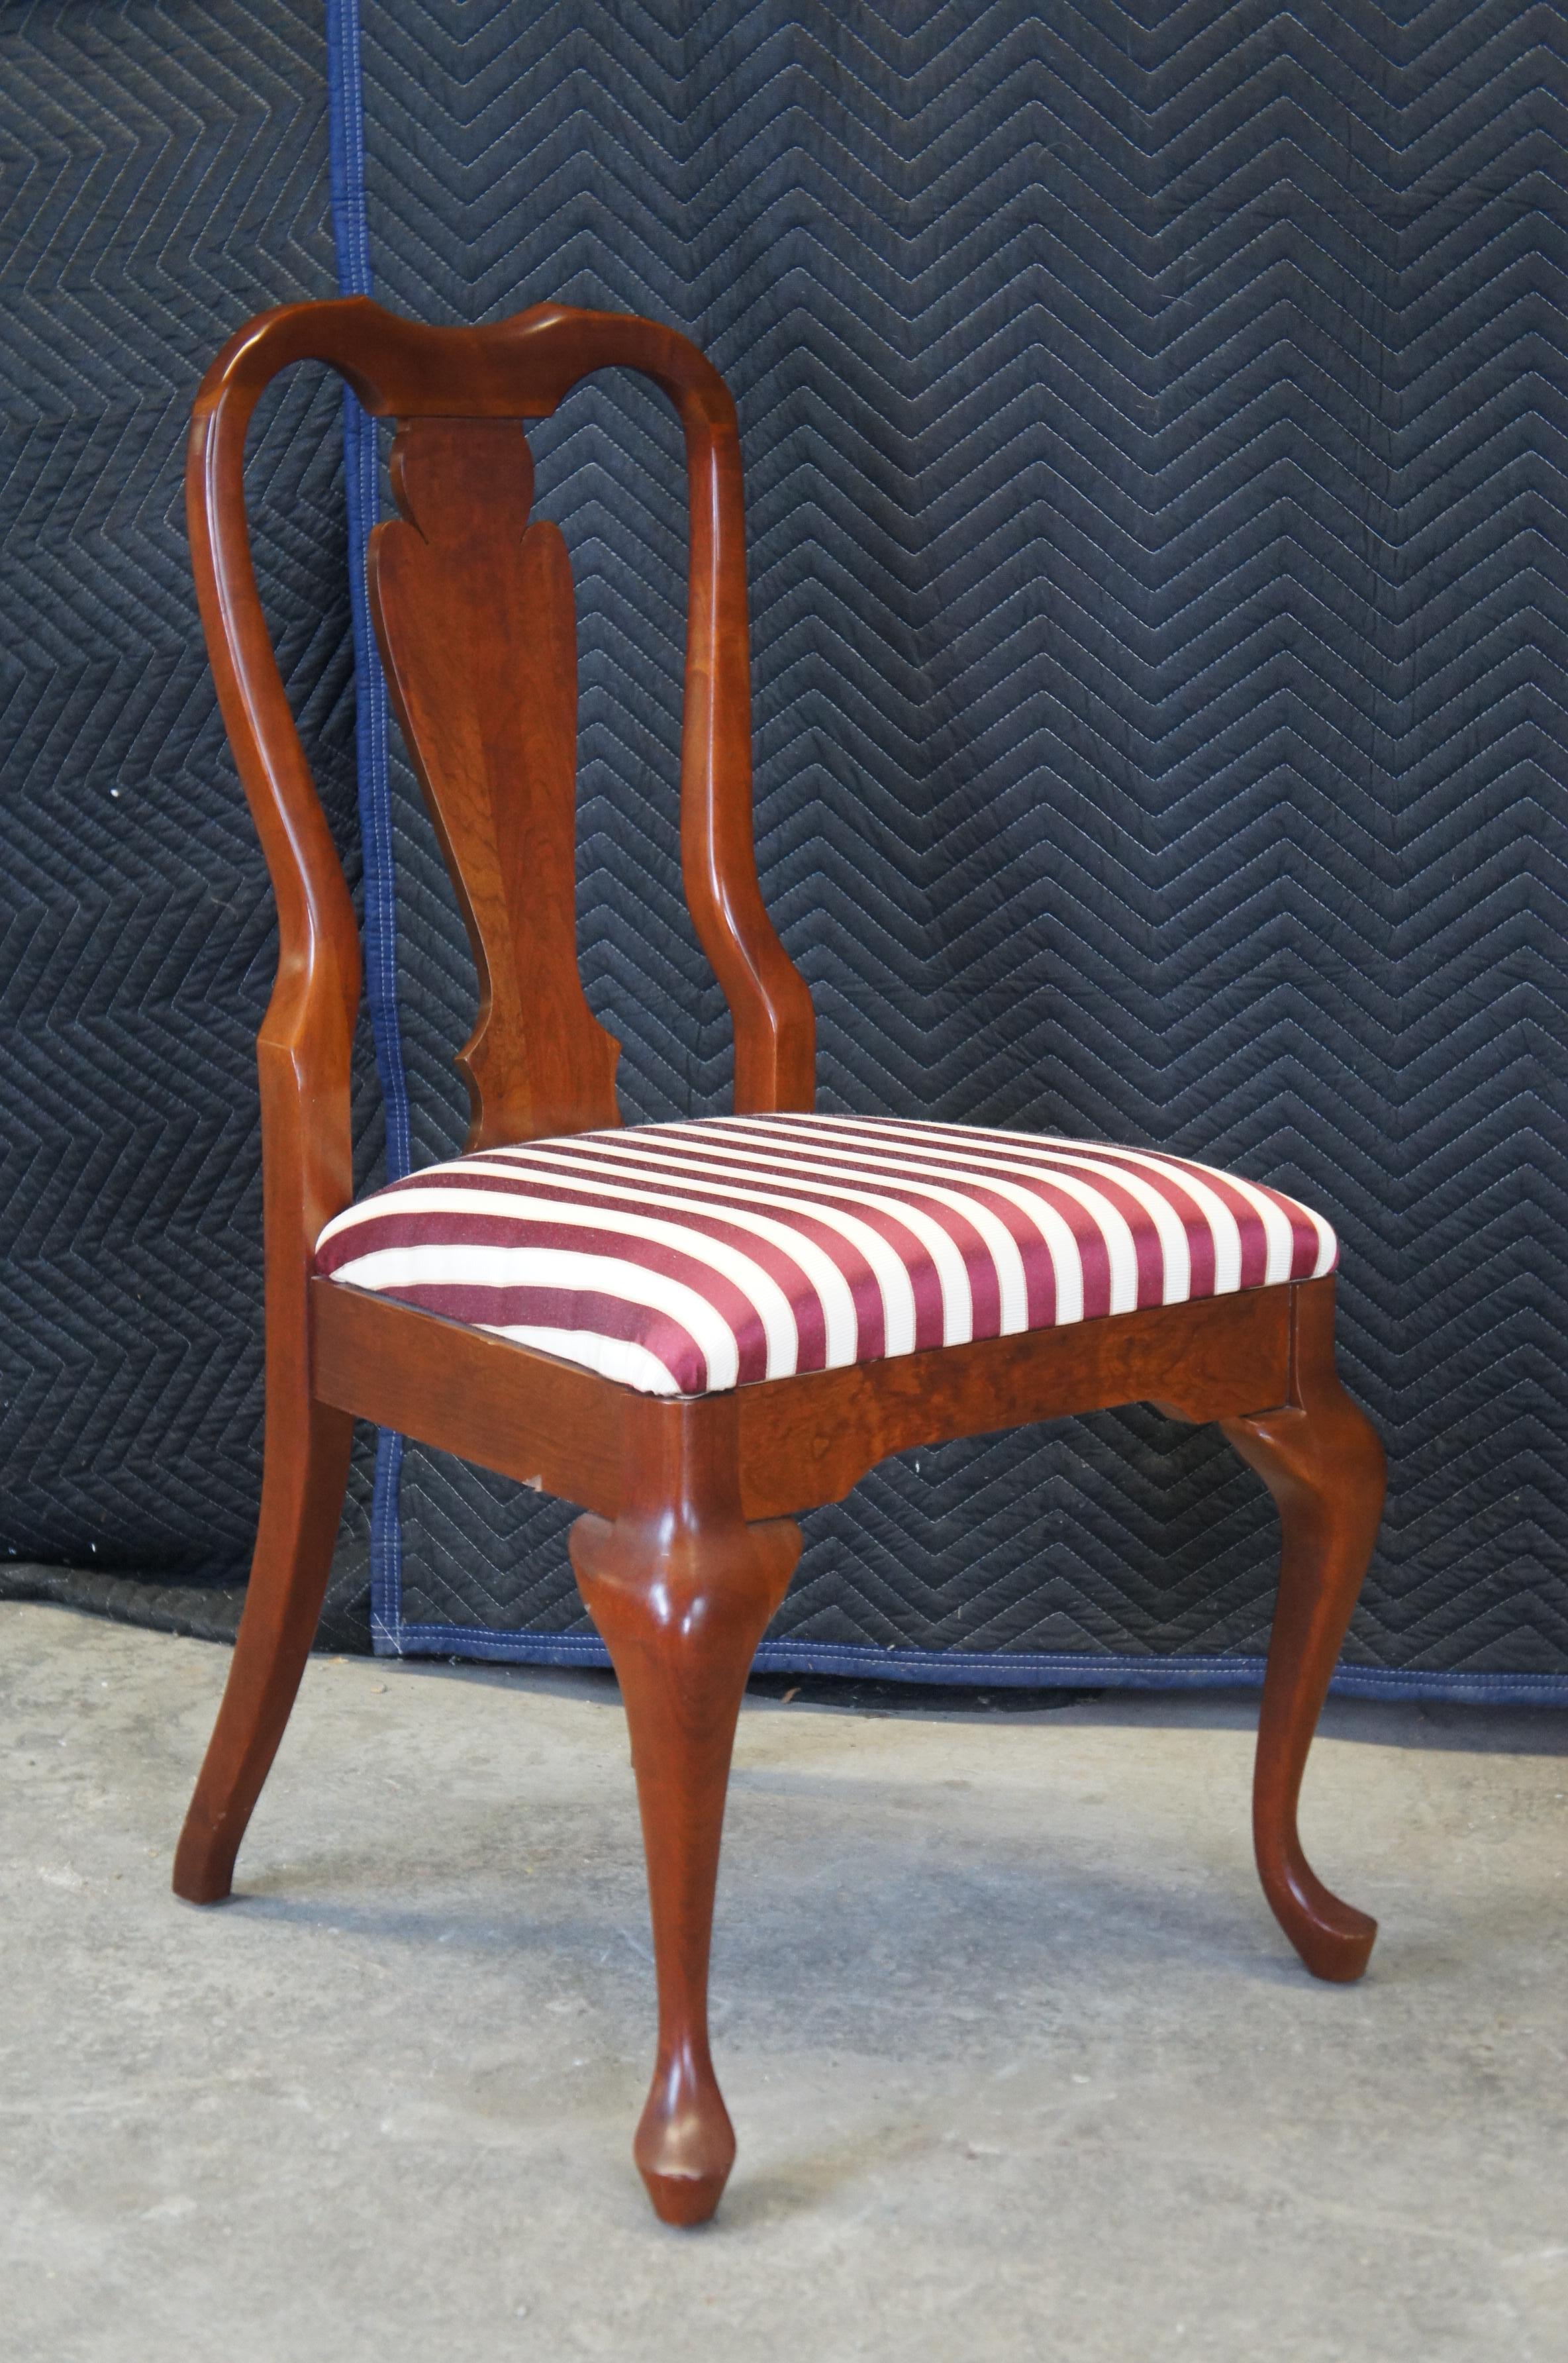 6 Vintage Cresent Queen Anne Style Cherry Dining Chairs Striped Upholstered Seat 4